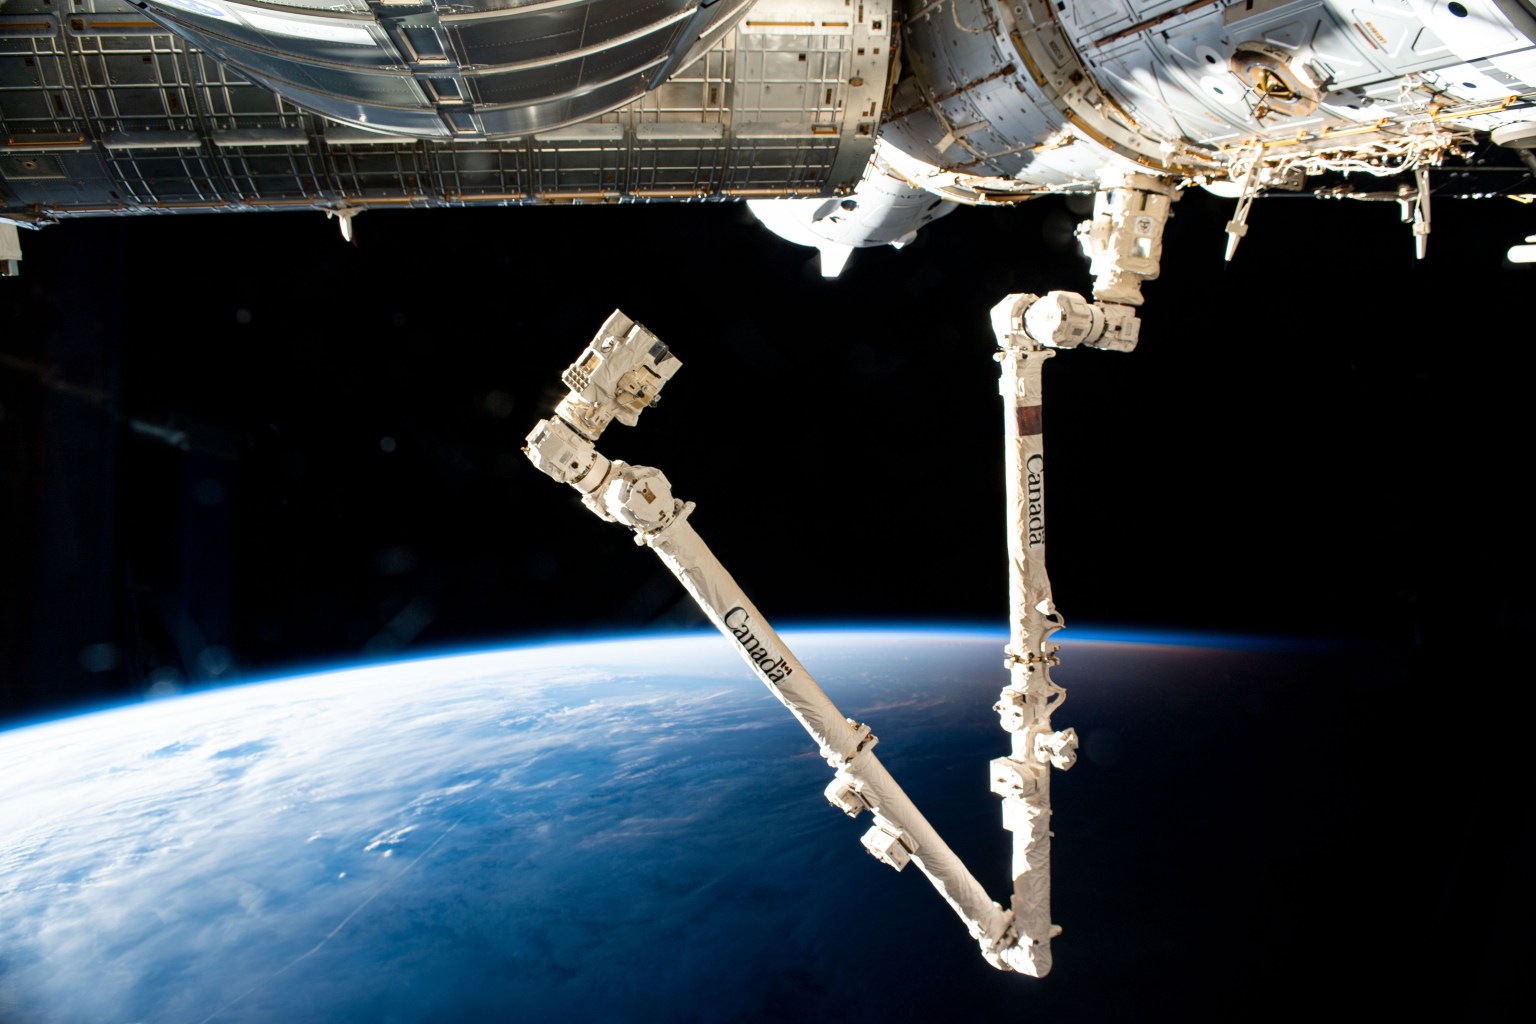 The forward portion of the International Space Station is pictured as it orbited into a sunrise 263 miles above the East China Sea. Prominent in the foreground, is the Canadarm2 robotic arm attached to the Harmony module. Toward the center top, is the SpaceX Crew Dragon Endeavour docked to Harmony's forward-facing international docking adapter. Portions of the Permanent Multipurpose Logistics Module, the Kibo laboratory module, the U.S. Destiny laboratory module and Harmony are also viewed in the frame.